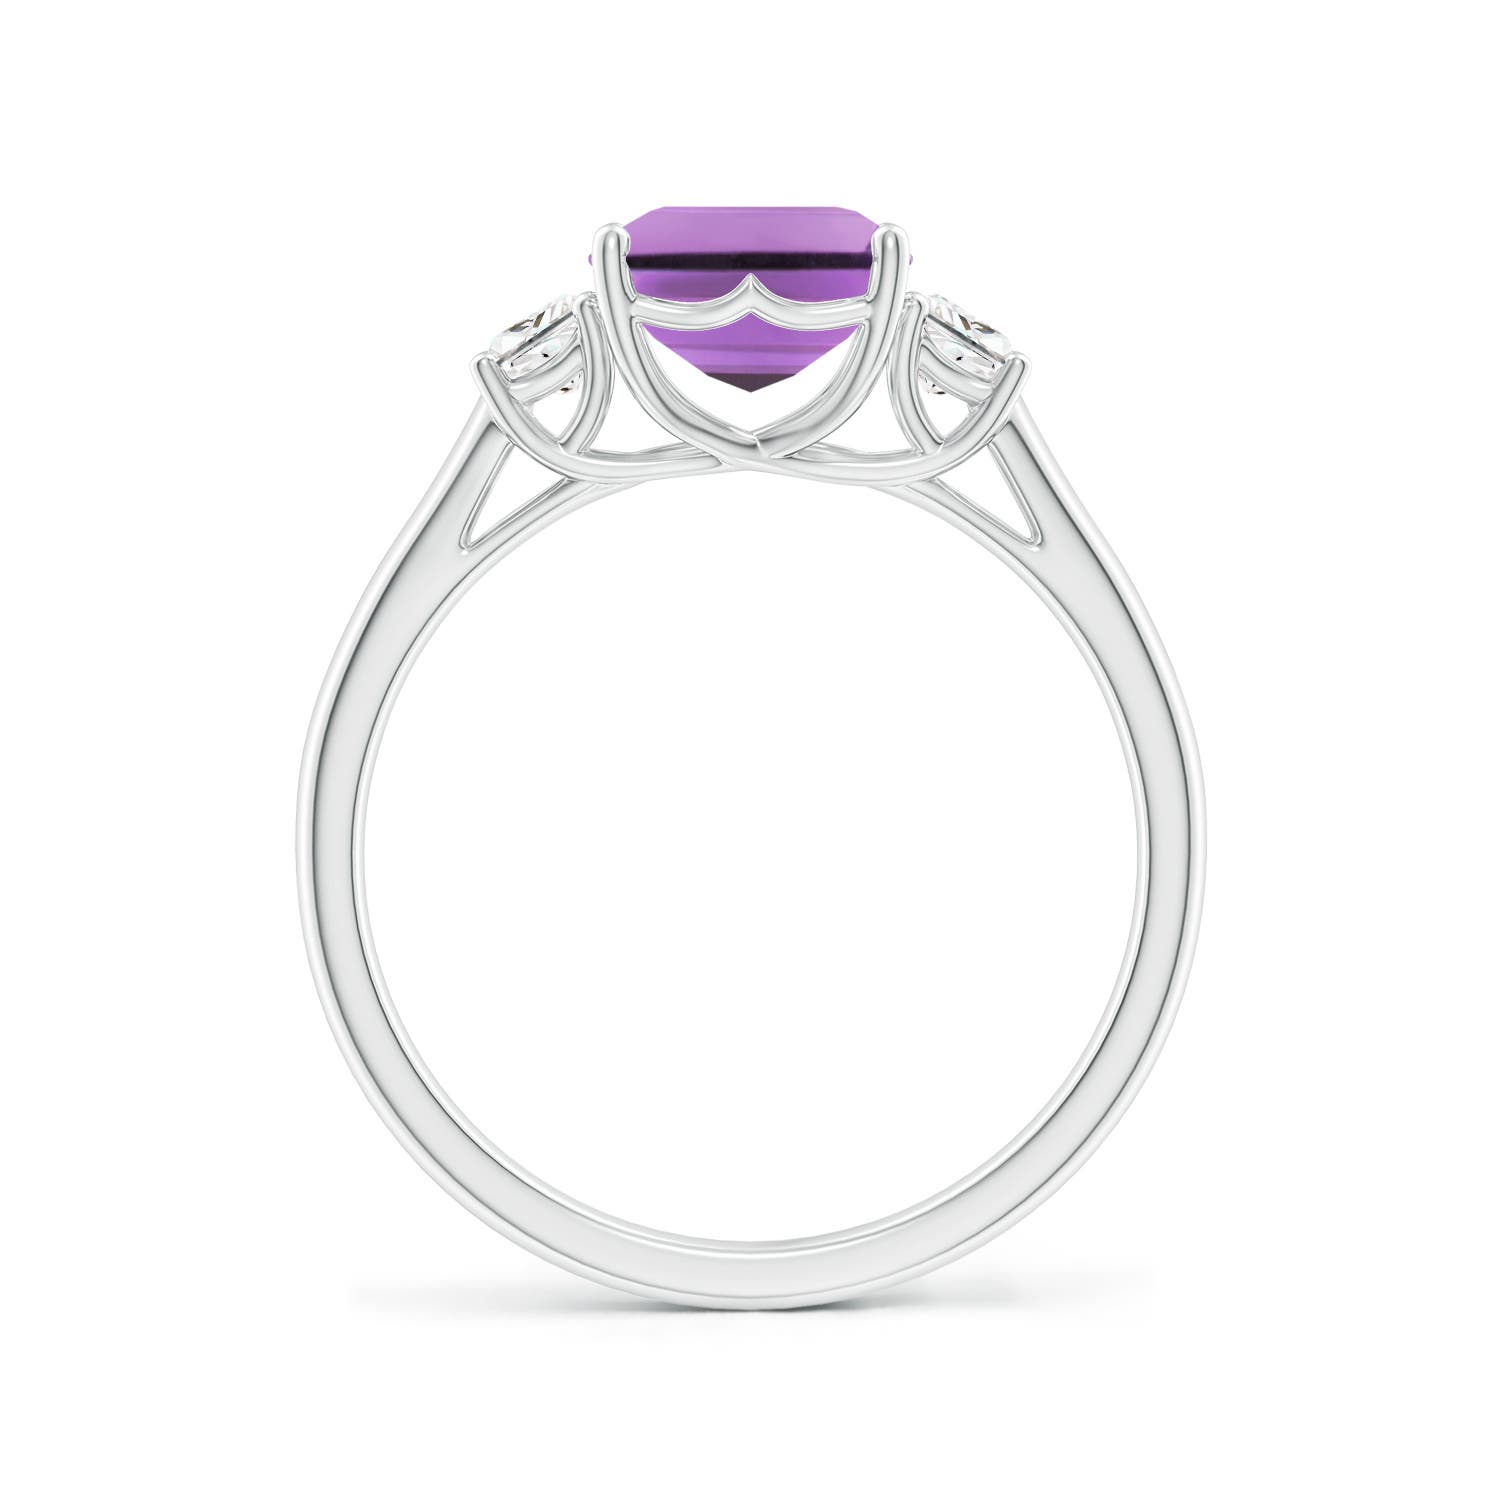 A- Amethyst / 2.52 CT / 14 KT White Gold